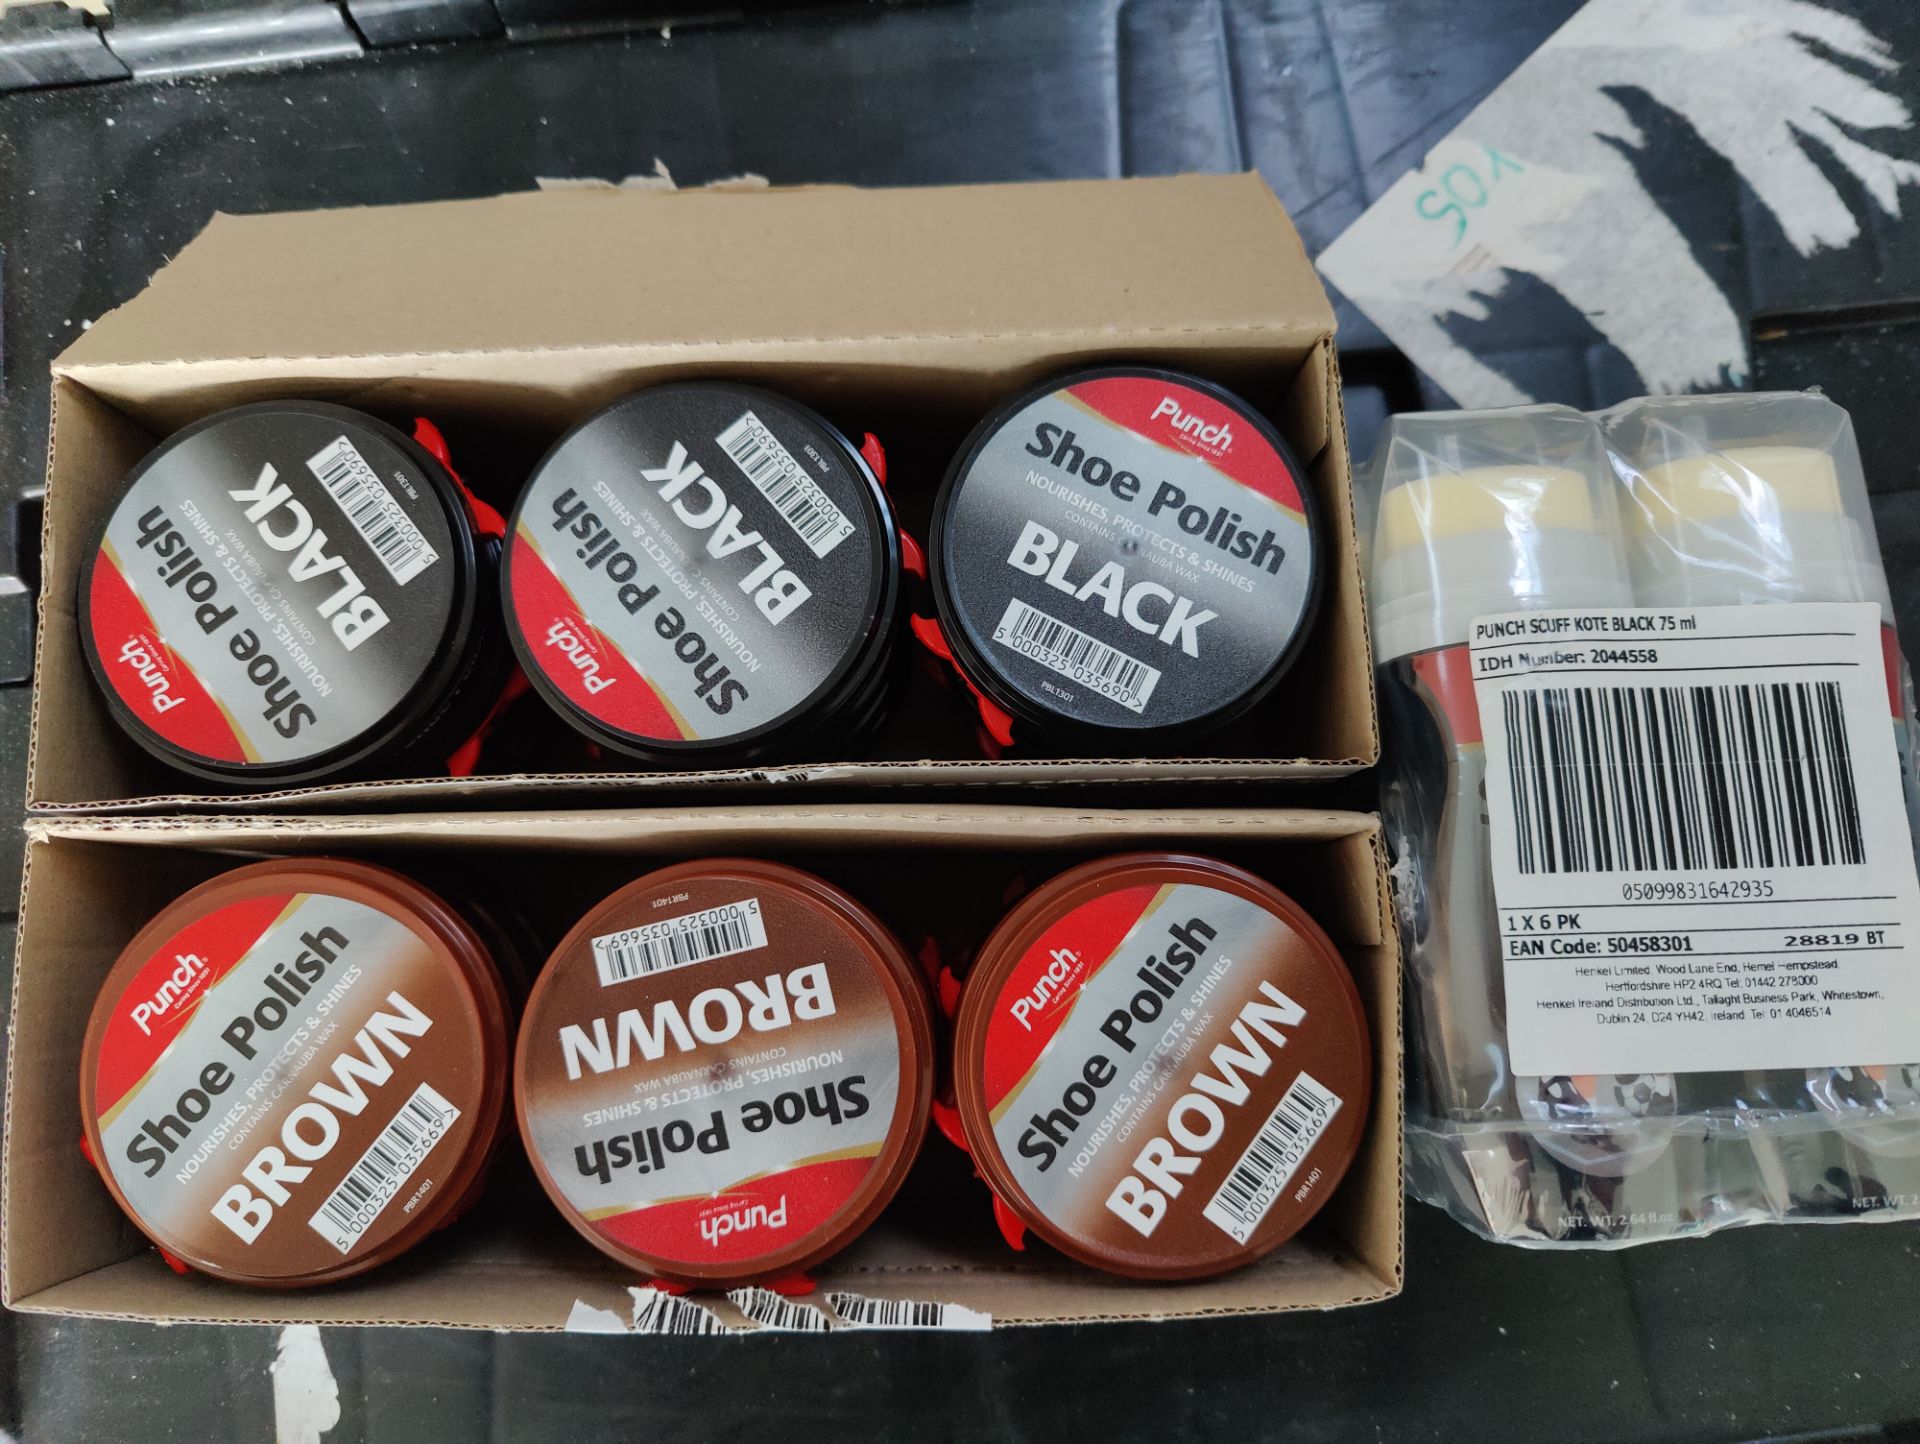 Punch Shoe polish black, brown and scuff